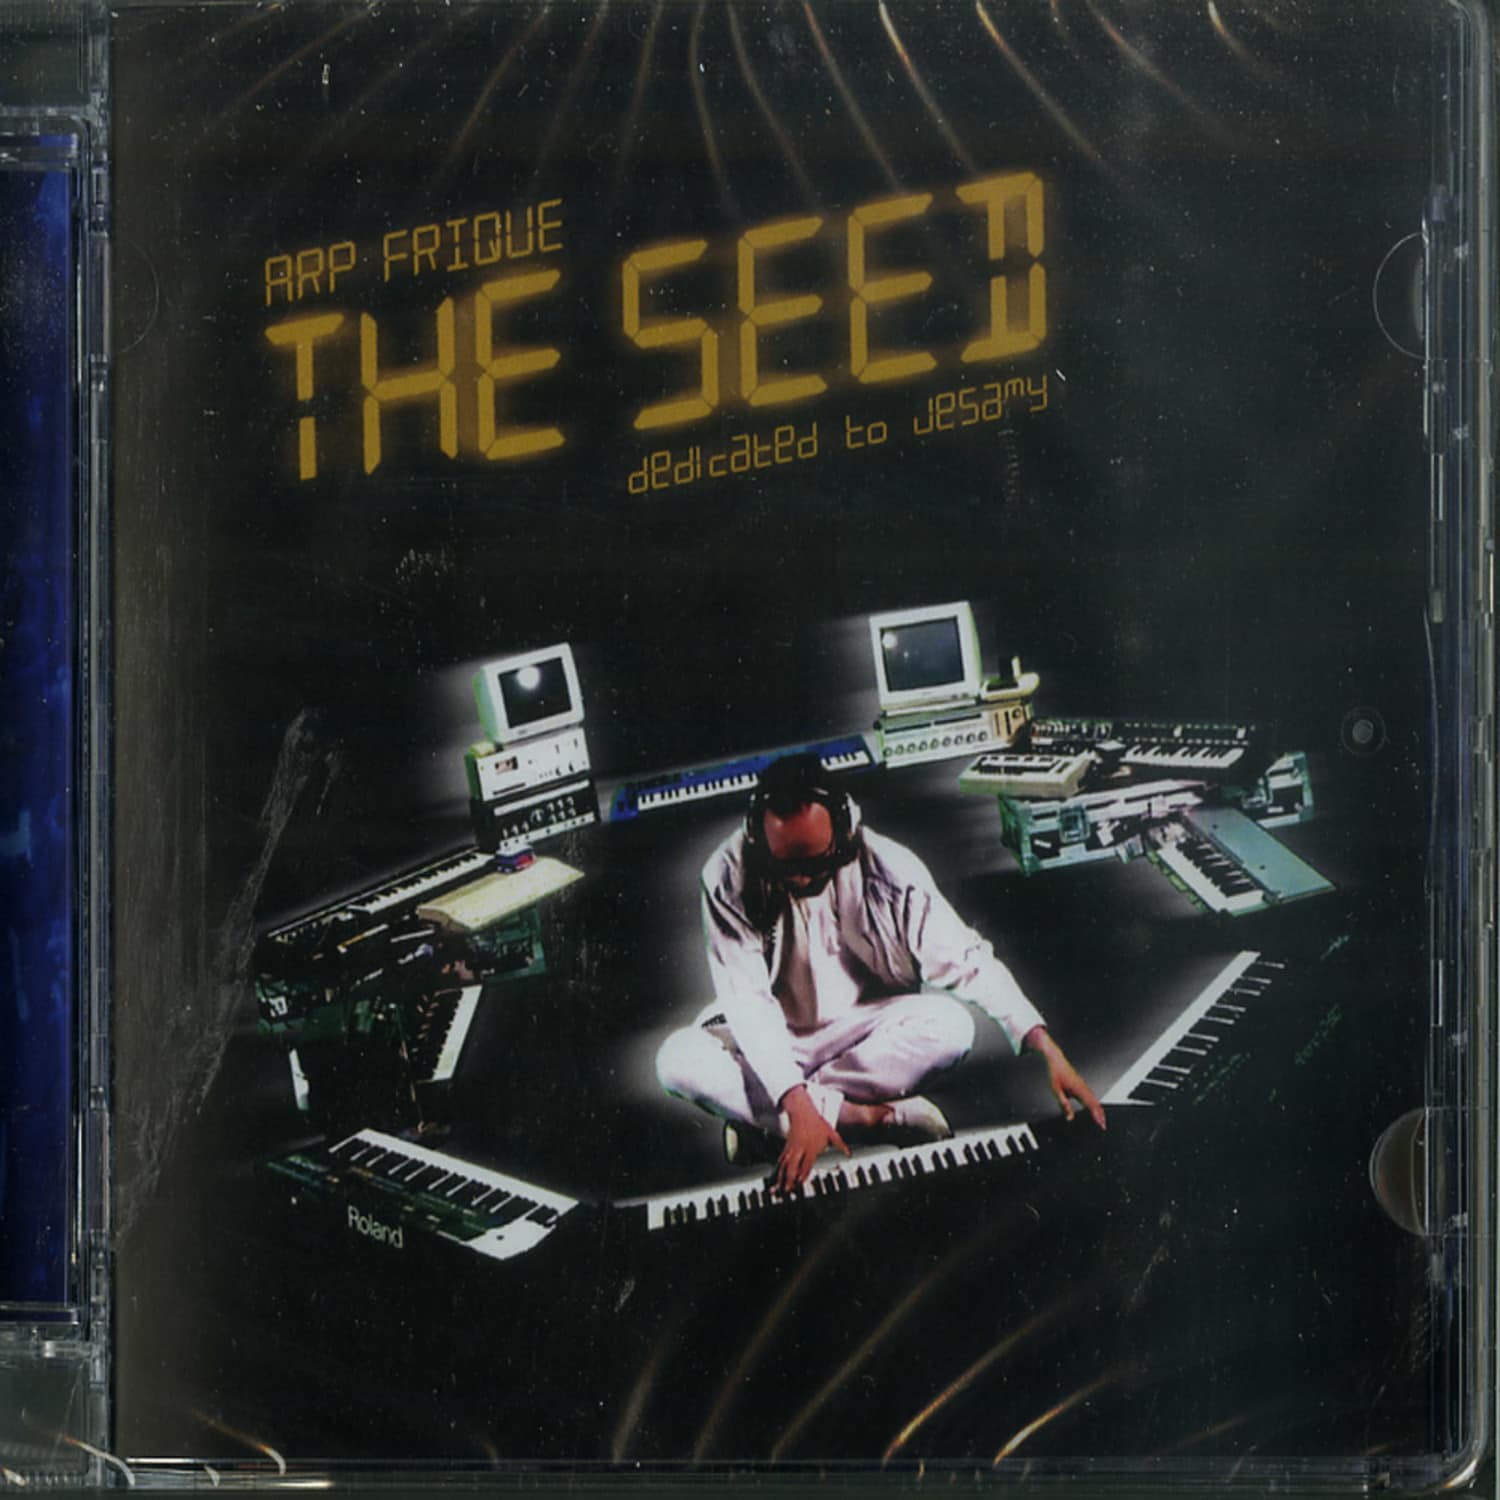 ARP Frique - THE SEED 